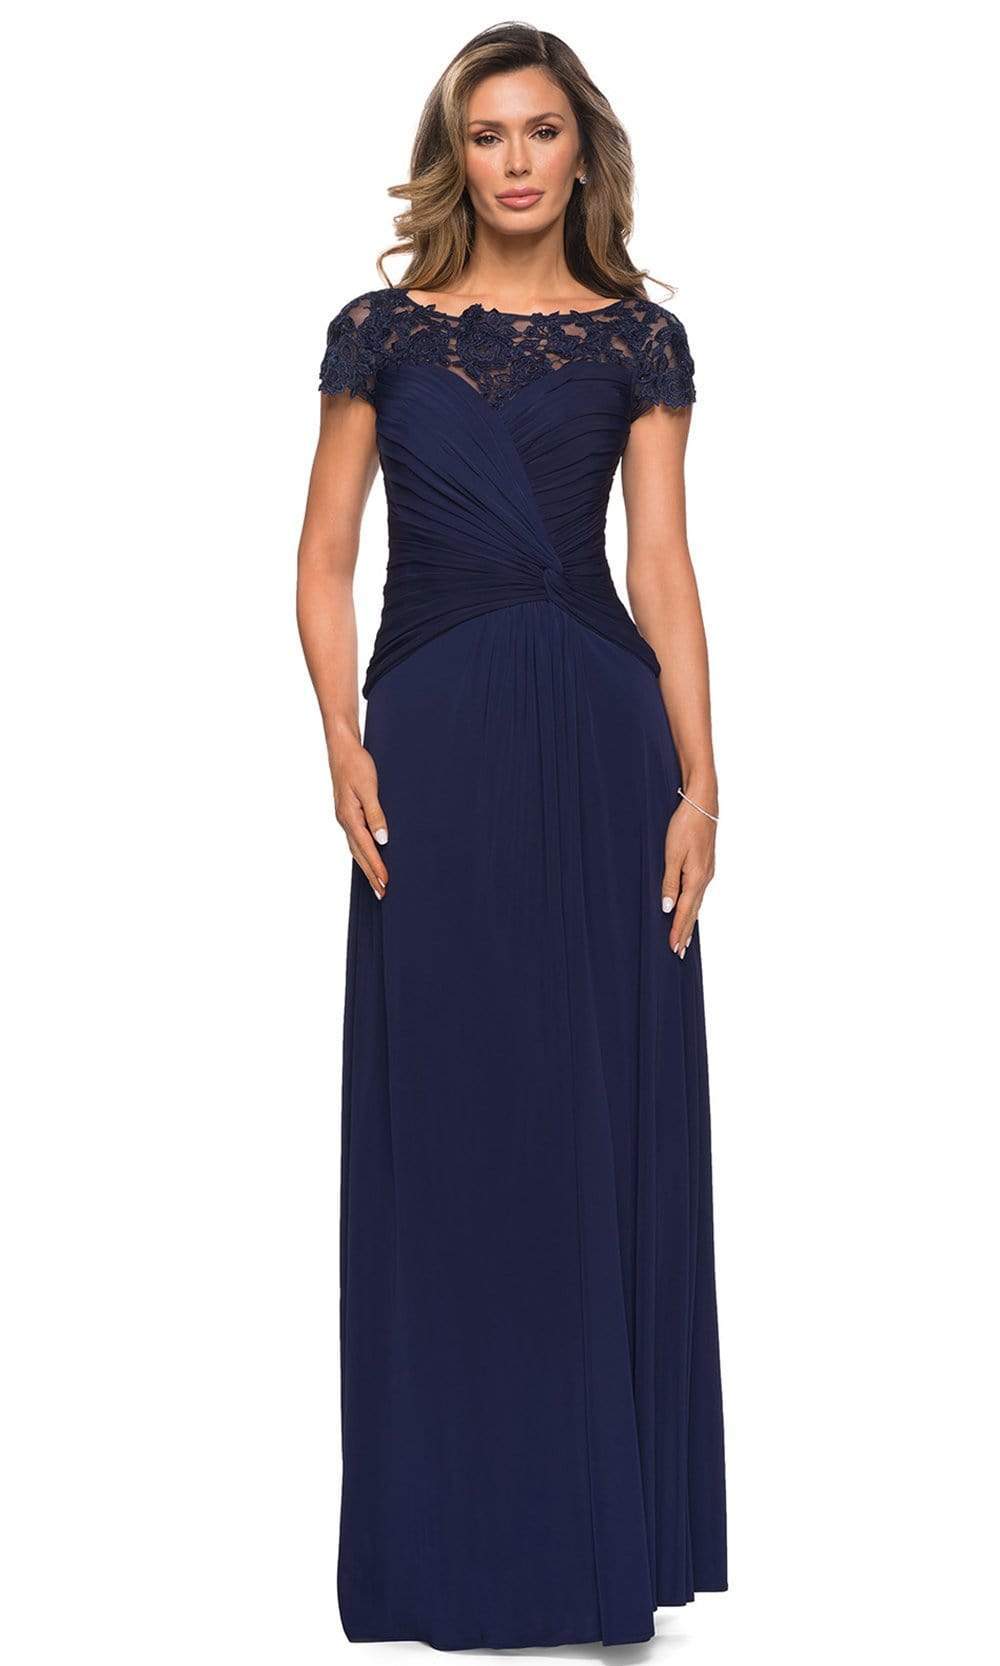 Image of La Femme - 28029 Ruched Knotted A-Line Evening Dress